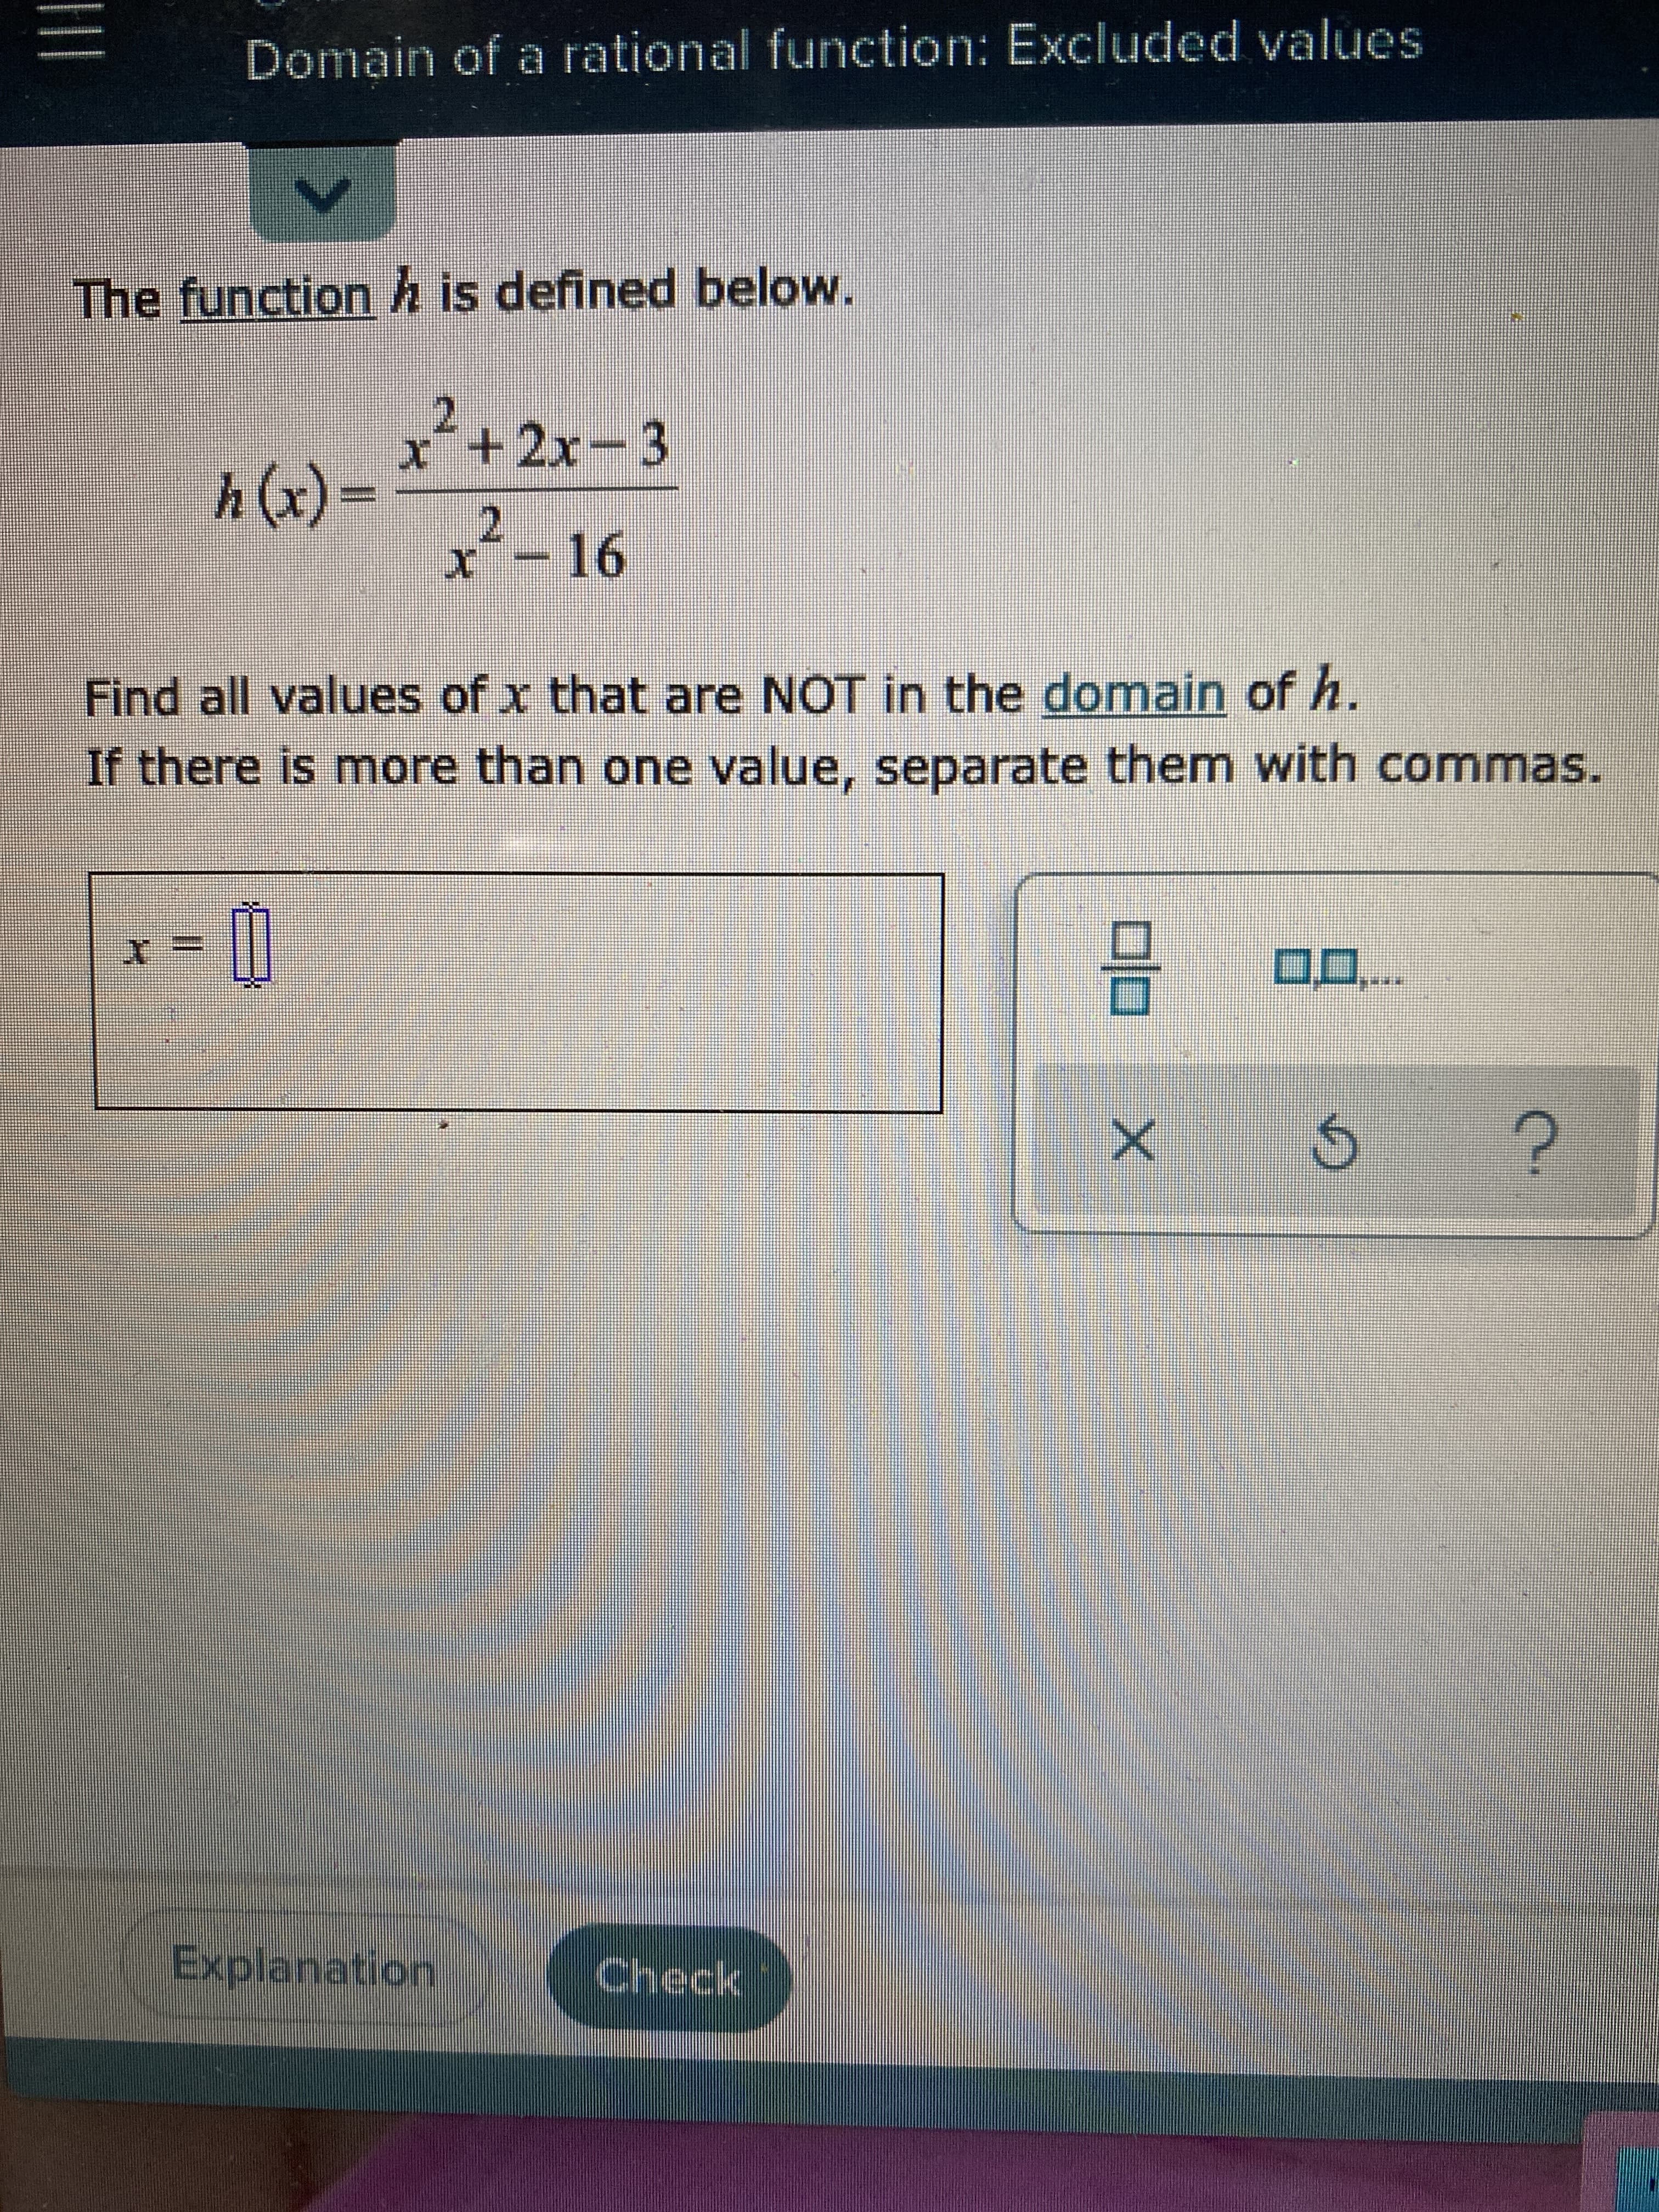 Find all values of x that are NOT in the domain of h.
If there is more than one value, separate them with comn
